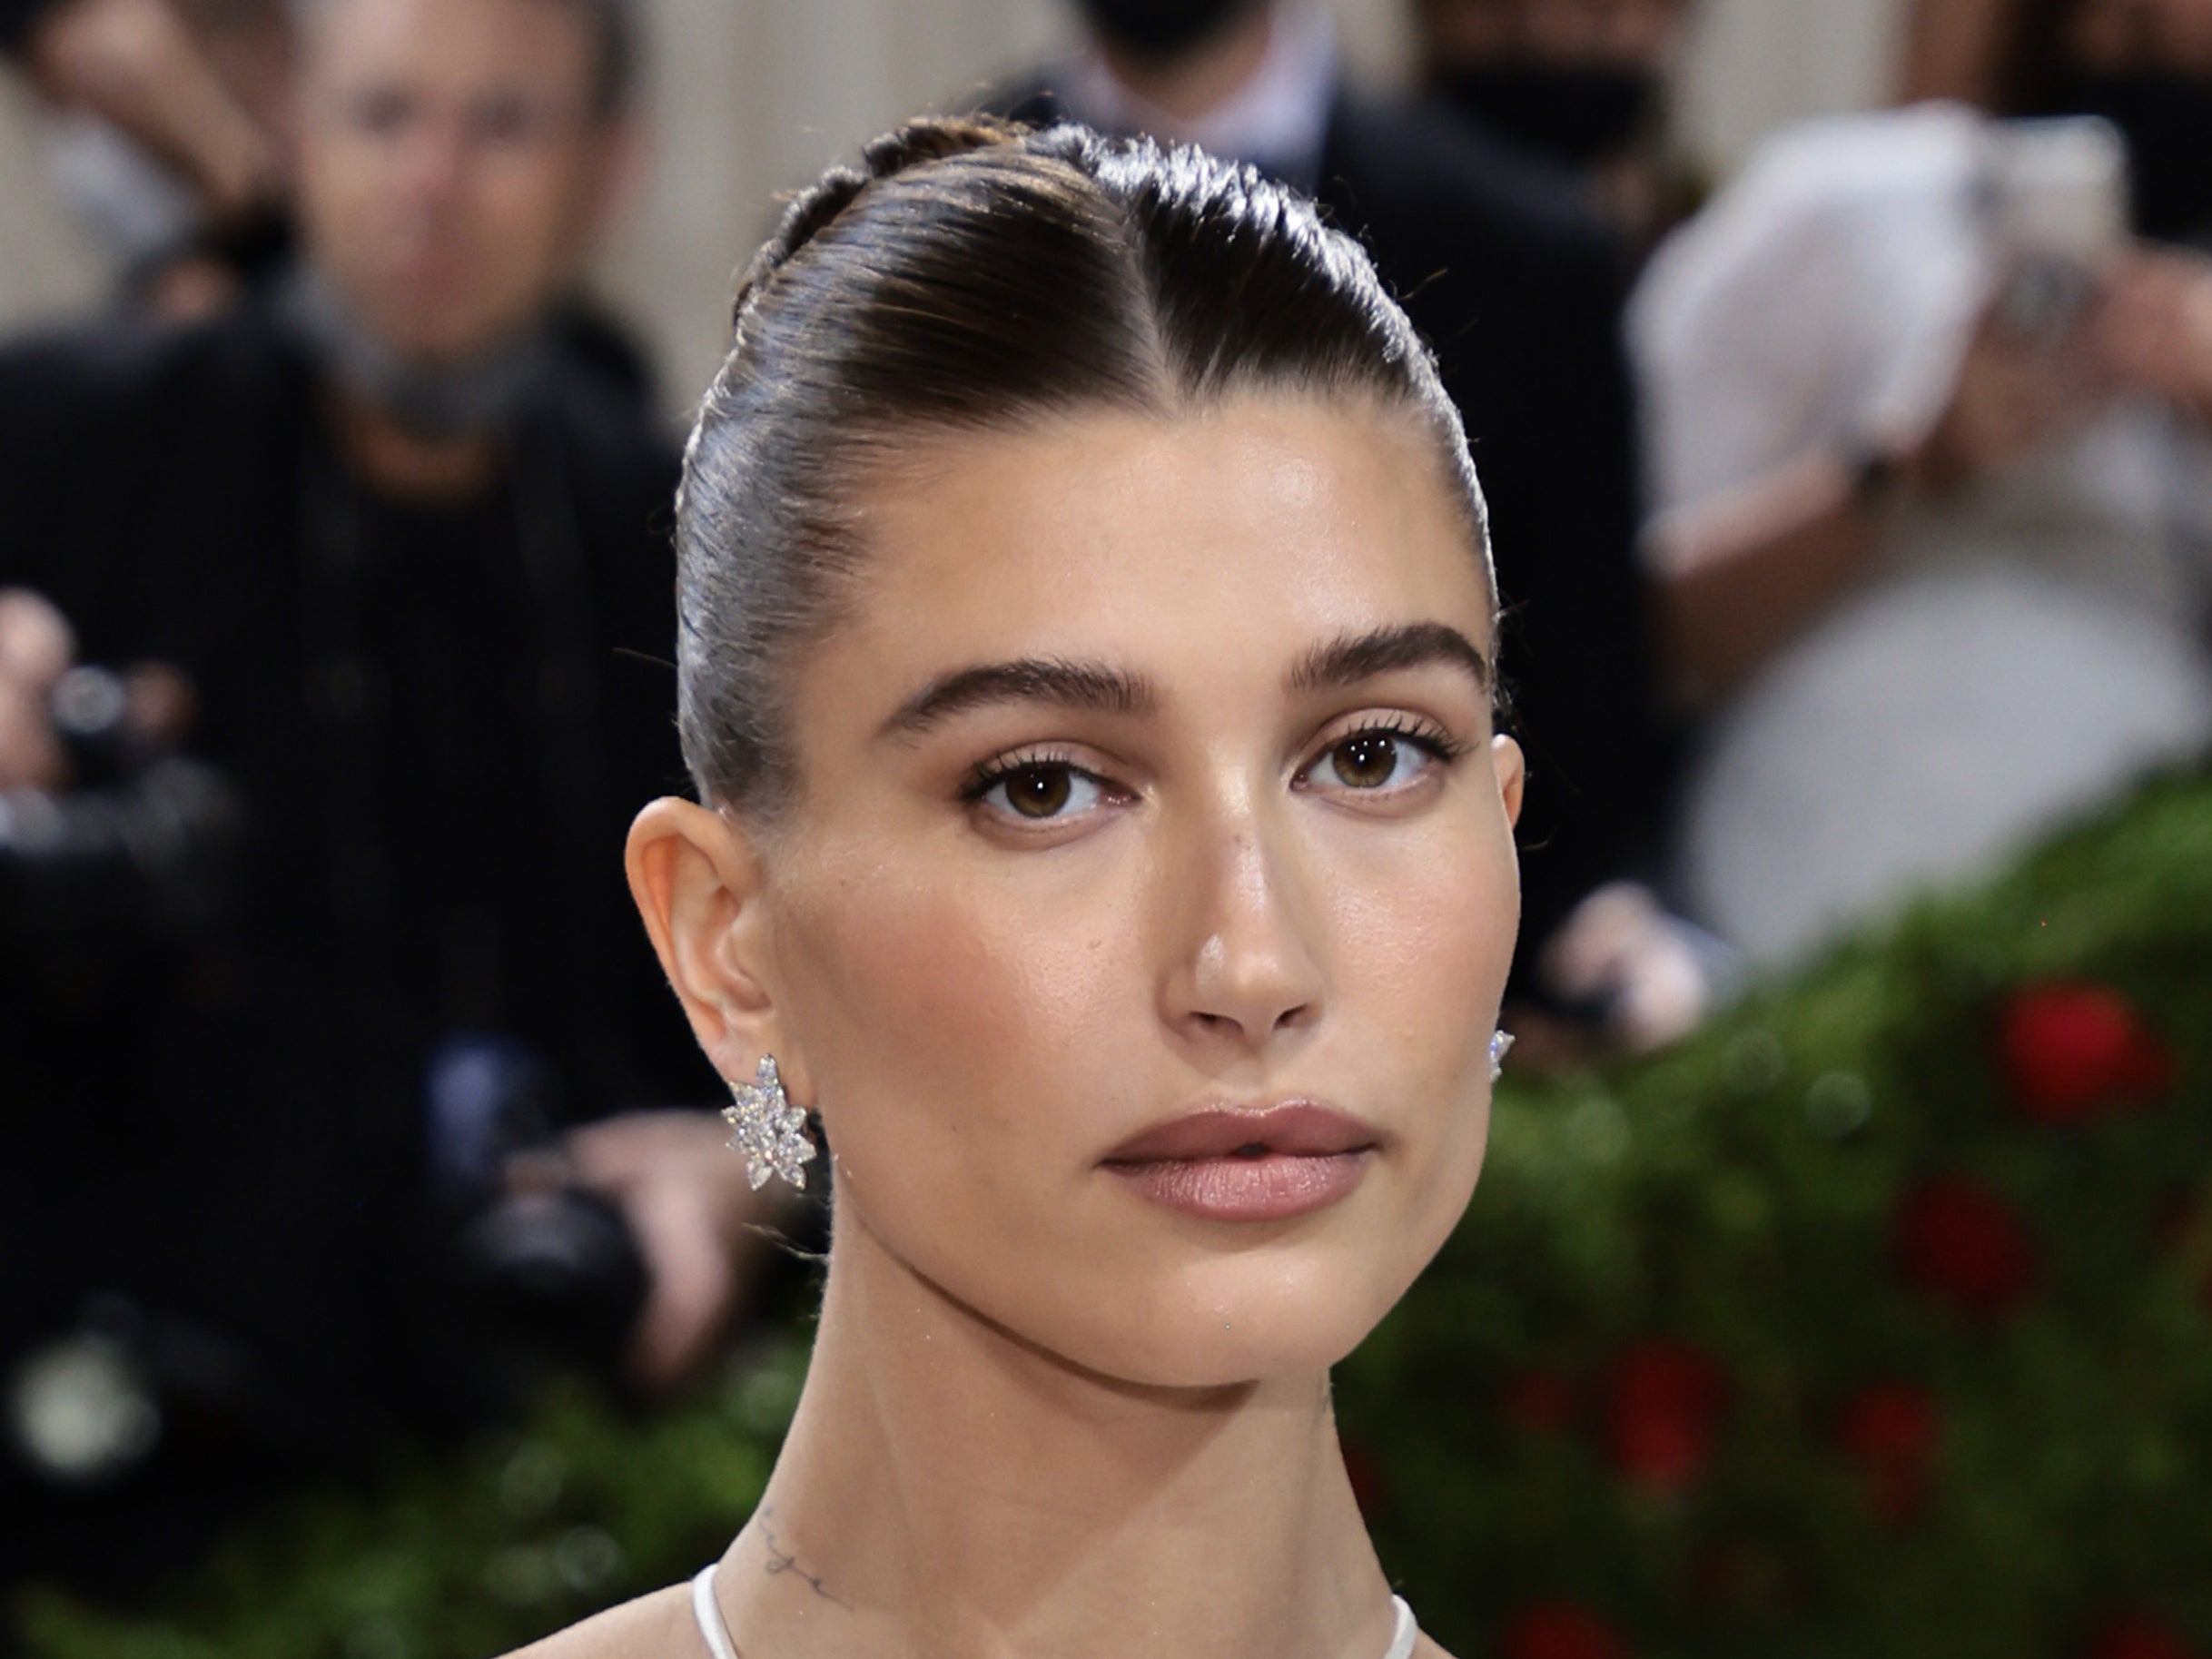 Hailey Baldwin Says People Are ‘tired Of Celebrity Skincare Brands As She Launches Her Own Line